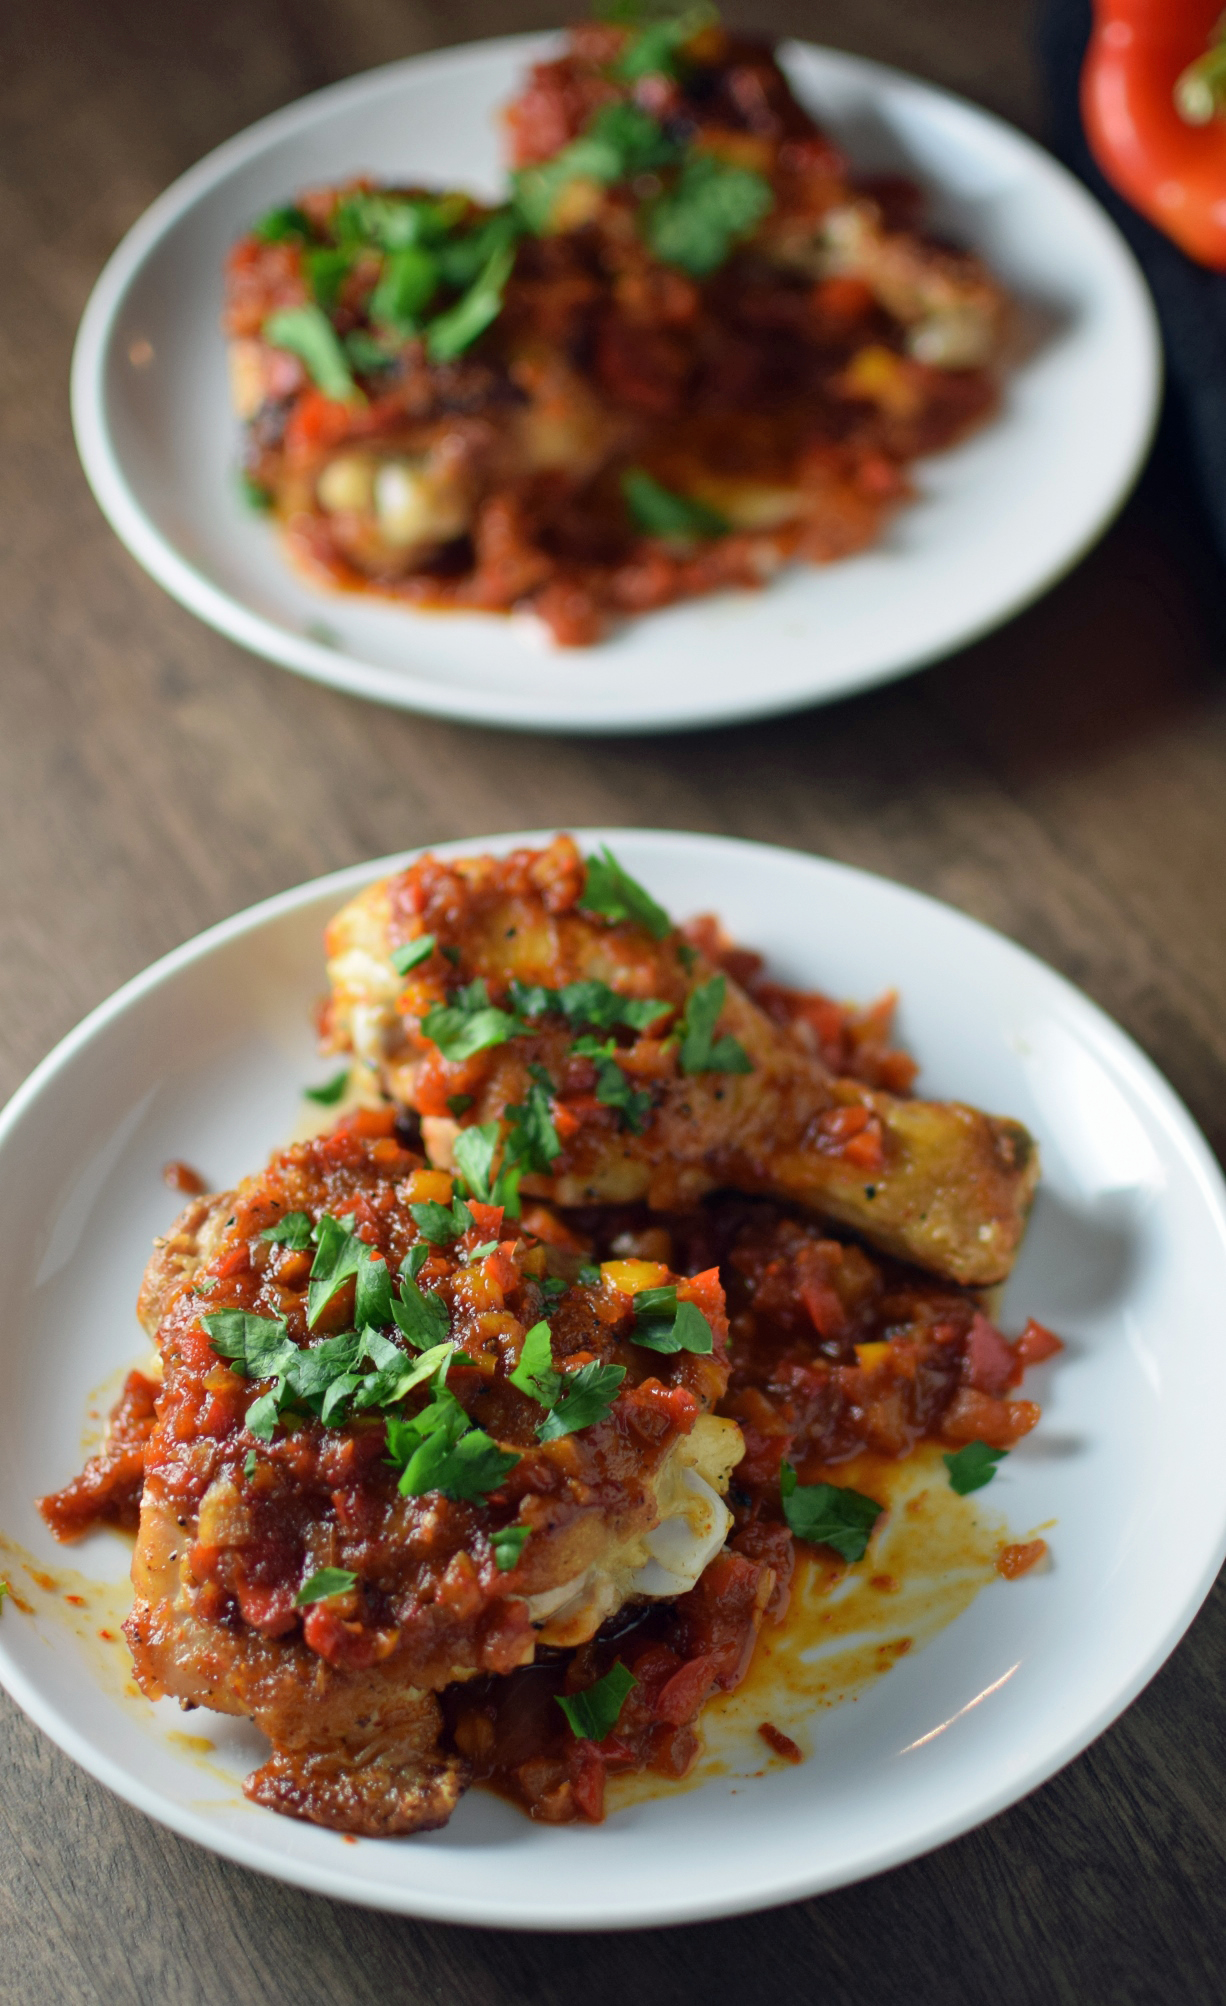 Spicy Basque chicken, the BEST roasted chicken recipe | NY Food Journal